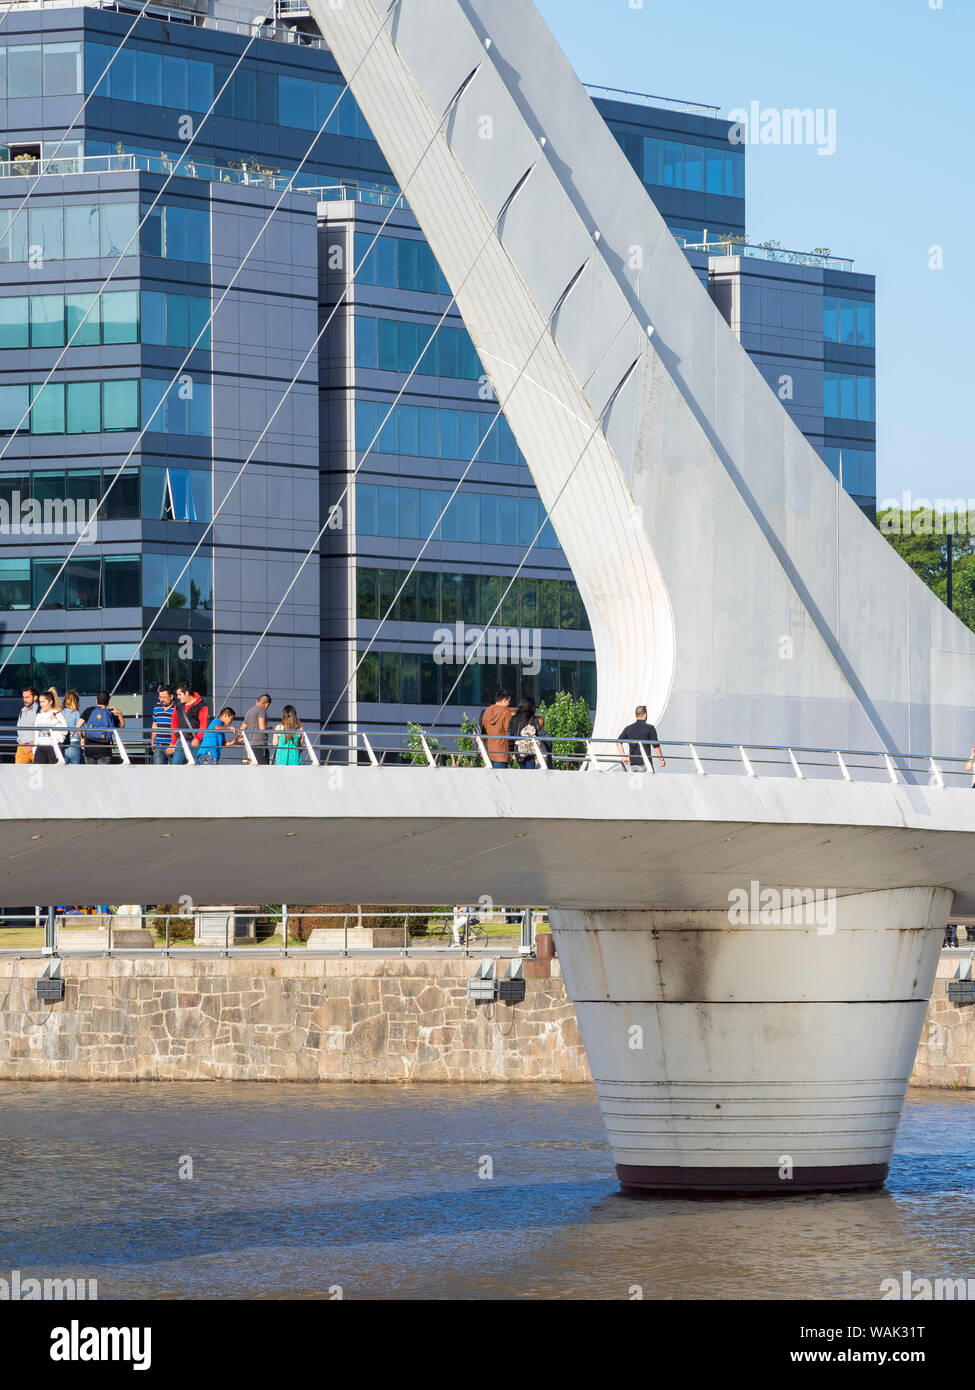 Puente de la Mujer, a rotating footbridge designed by architect Santiago Calatrava. Puerto Madero, the modern living quarter around the old docks of Buenos Aires. South America, Argentina. (Editorial Use Only) Stock Photo